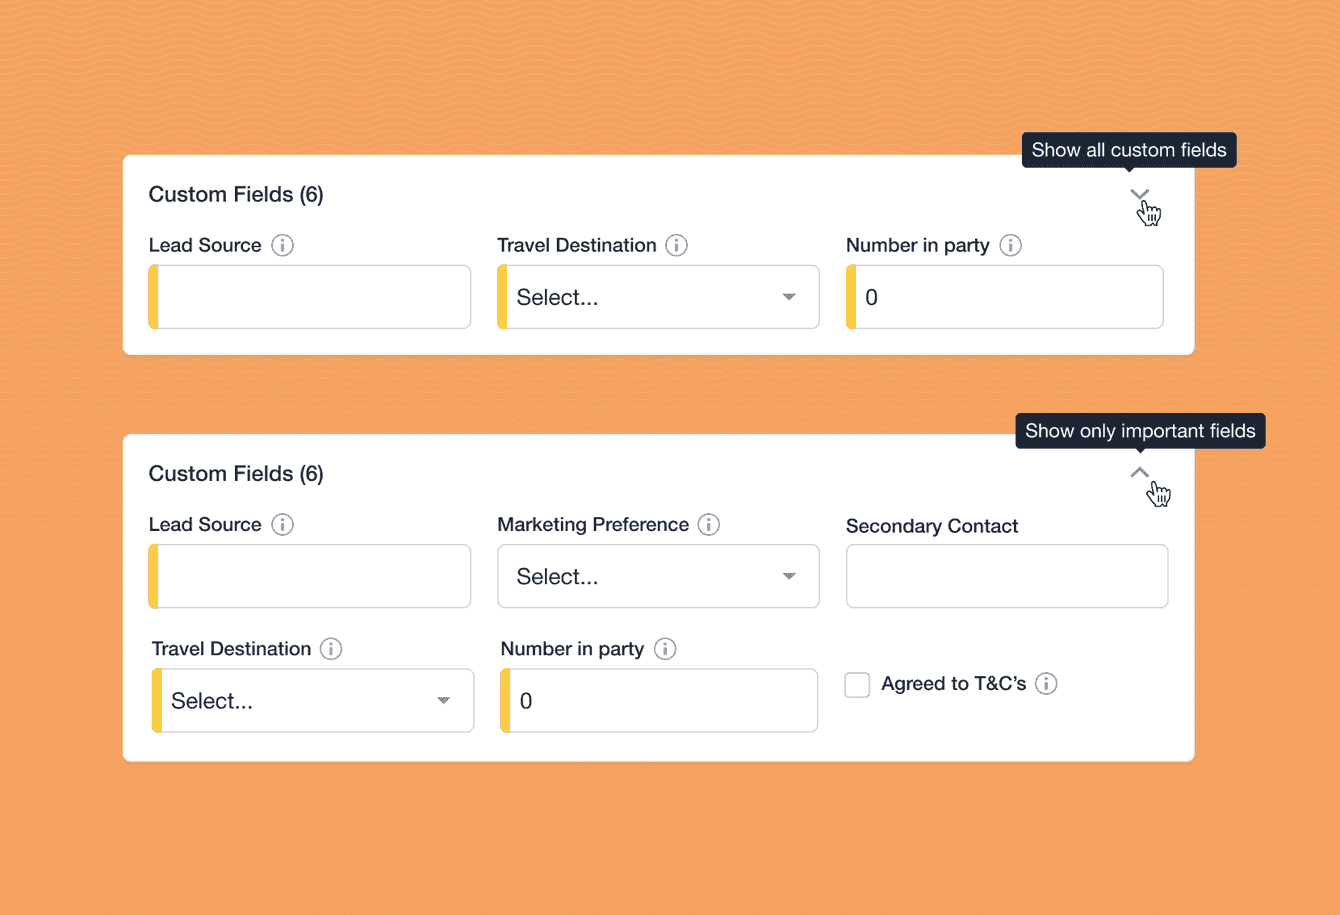 Example of custom and important fields in the Capsule CRM